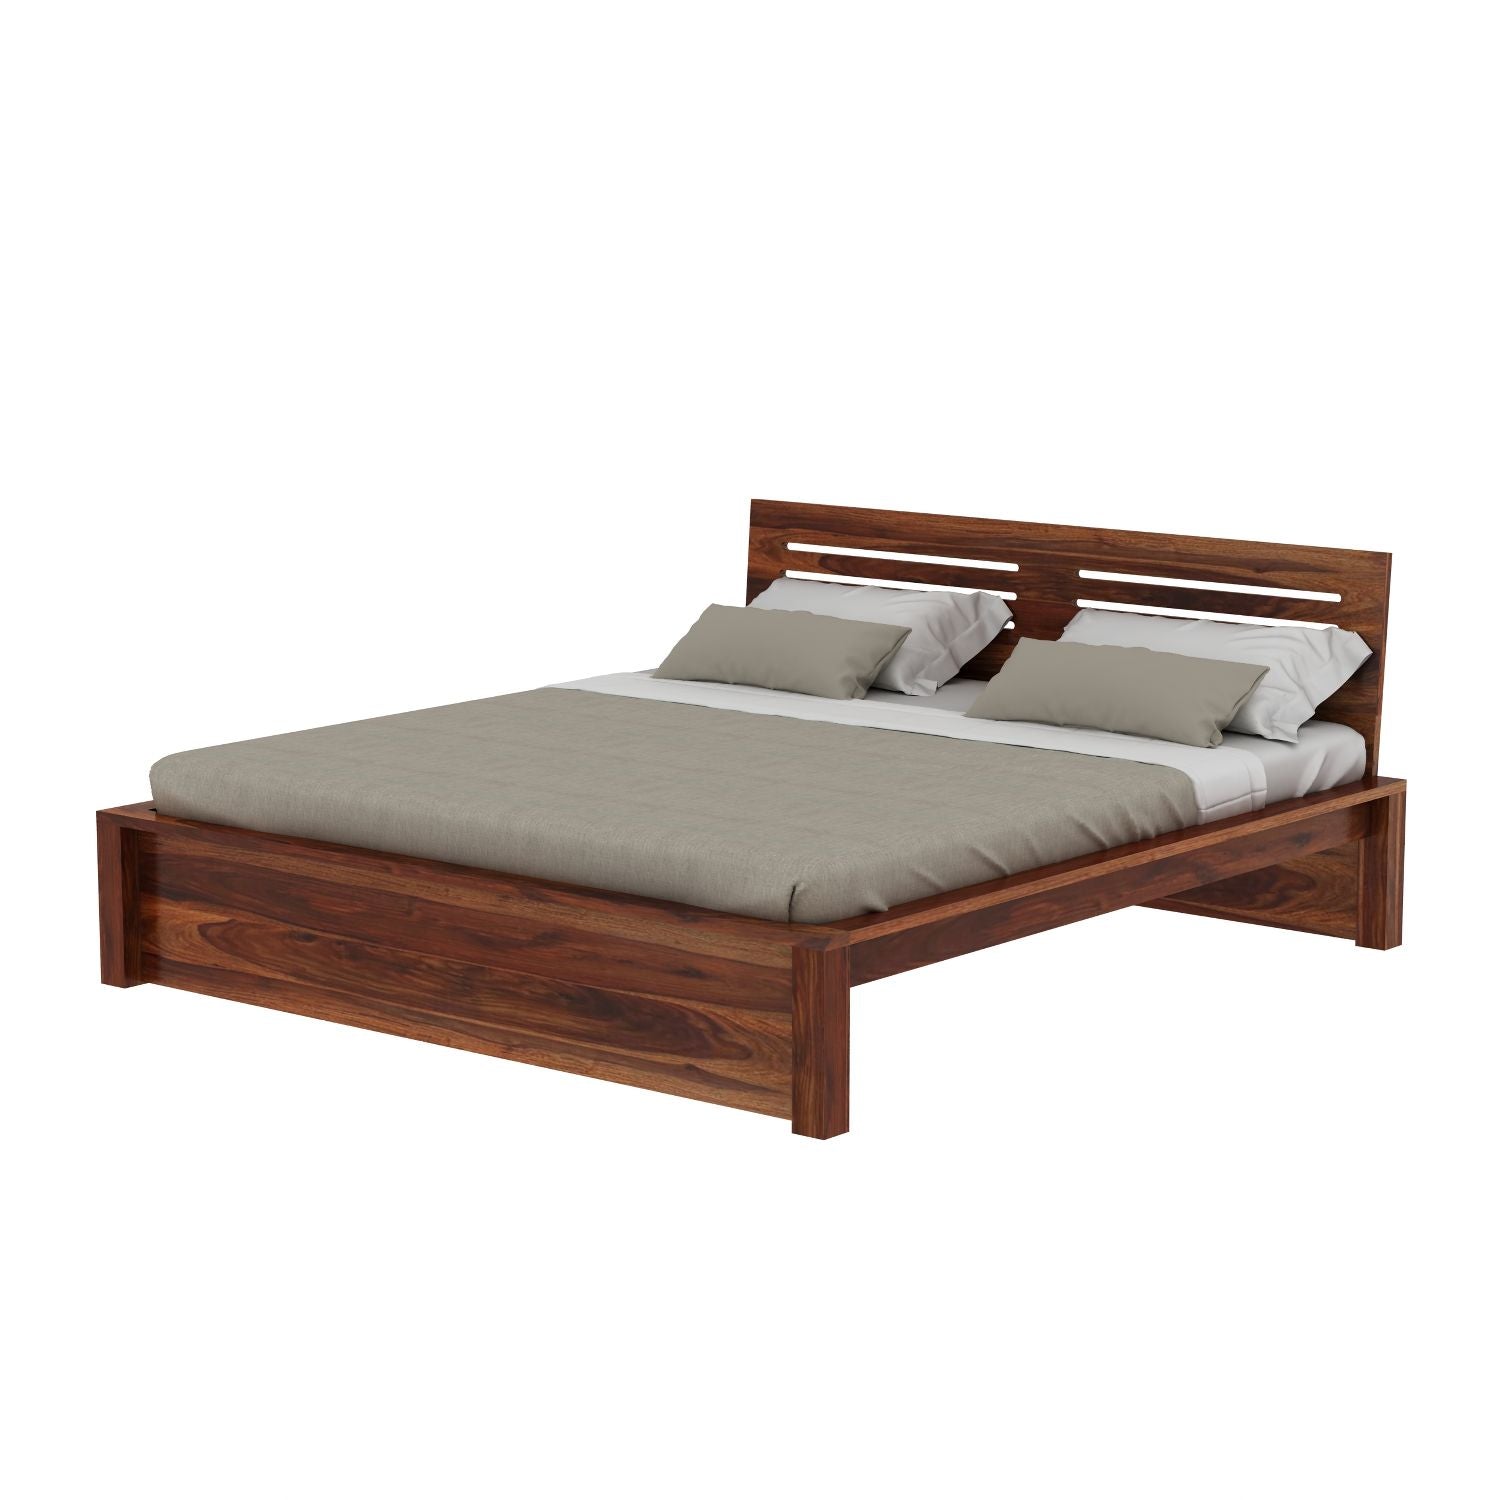 Due Solid Sheesham Wood Bed Without Storage (King Size, Natural Finish)